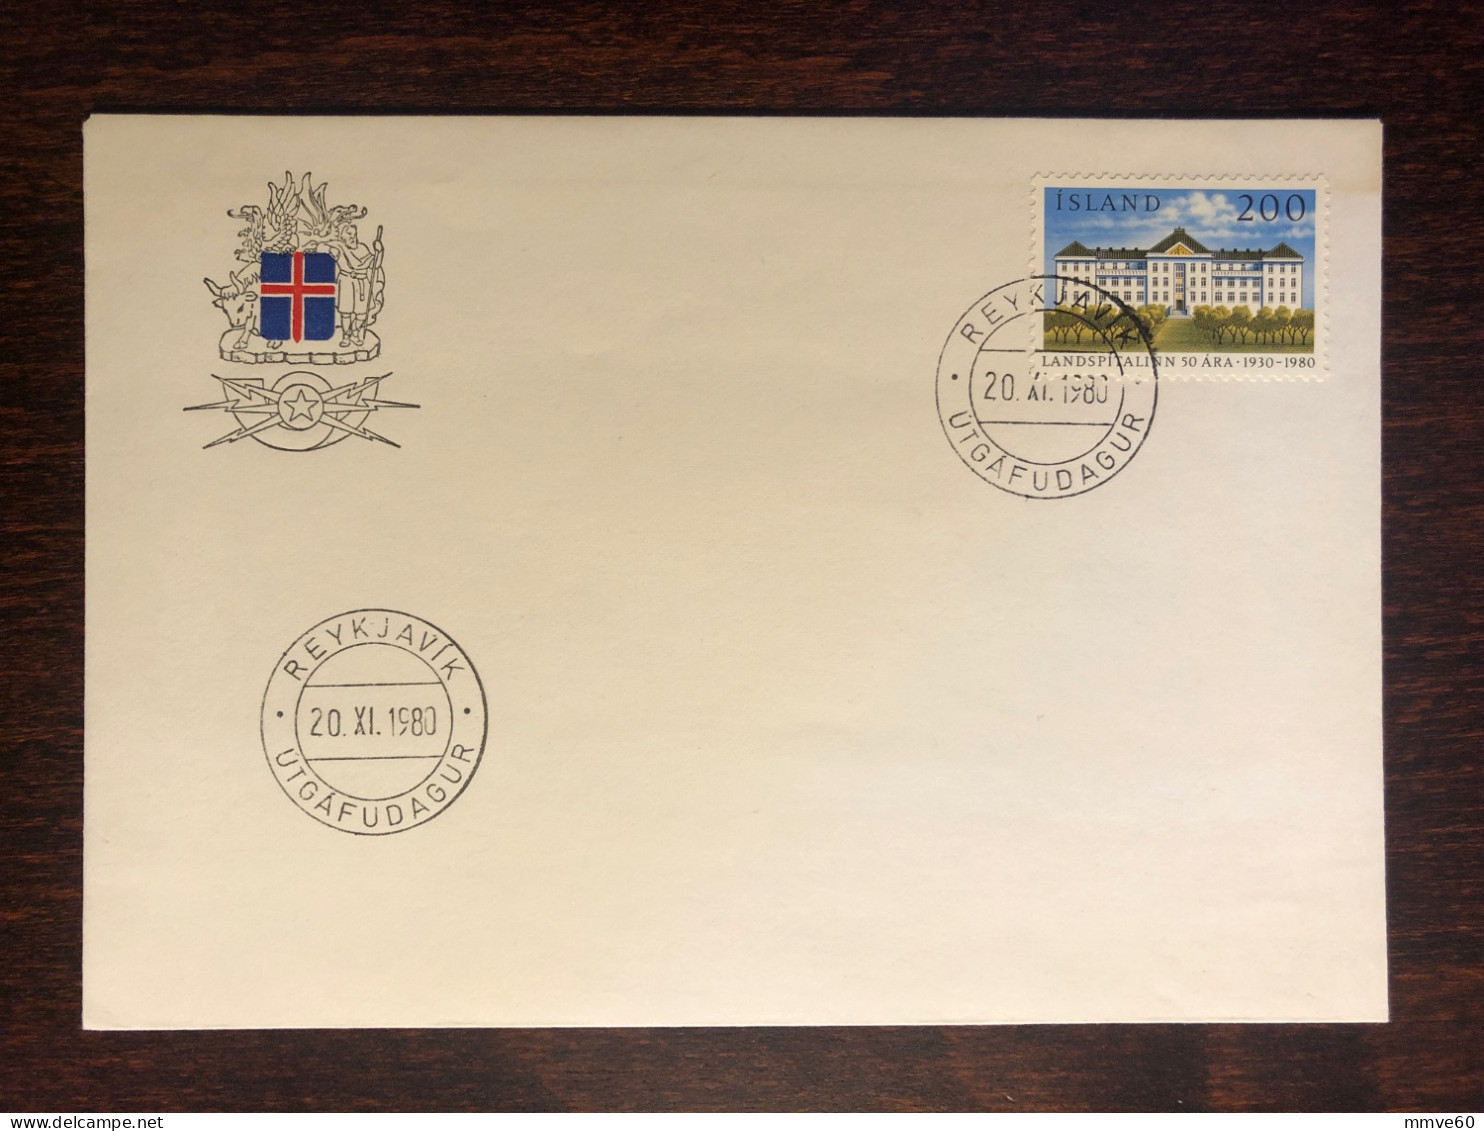 ICELAND FDC COVER 1980 YEAR HOSPITAL HEALTH MEDICINE STAMPS - FDC